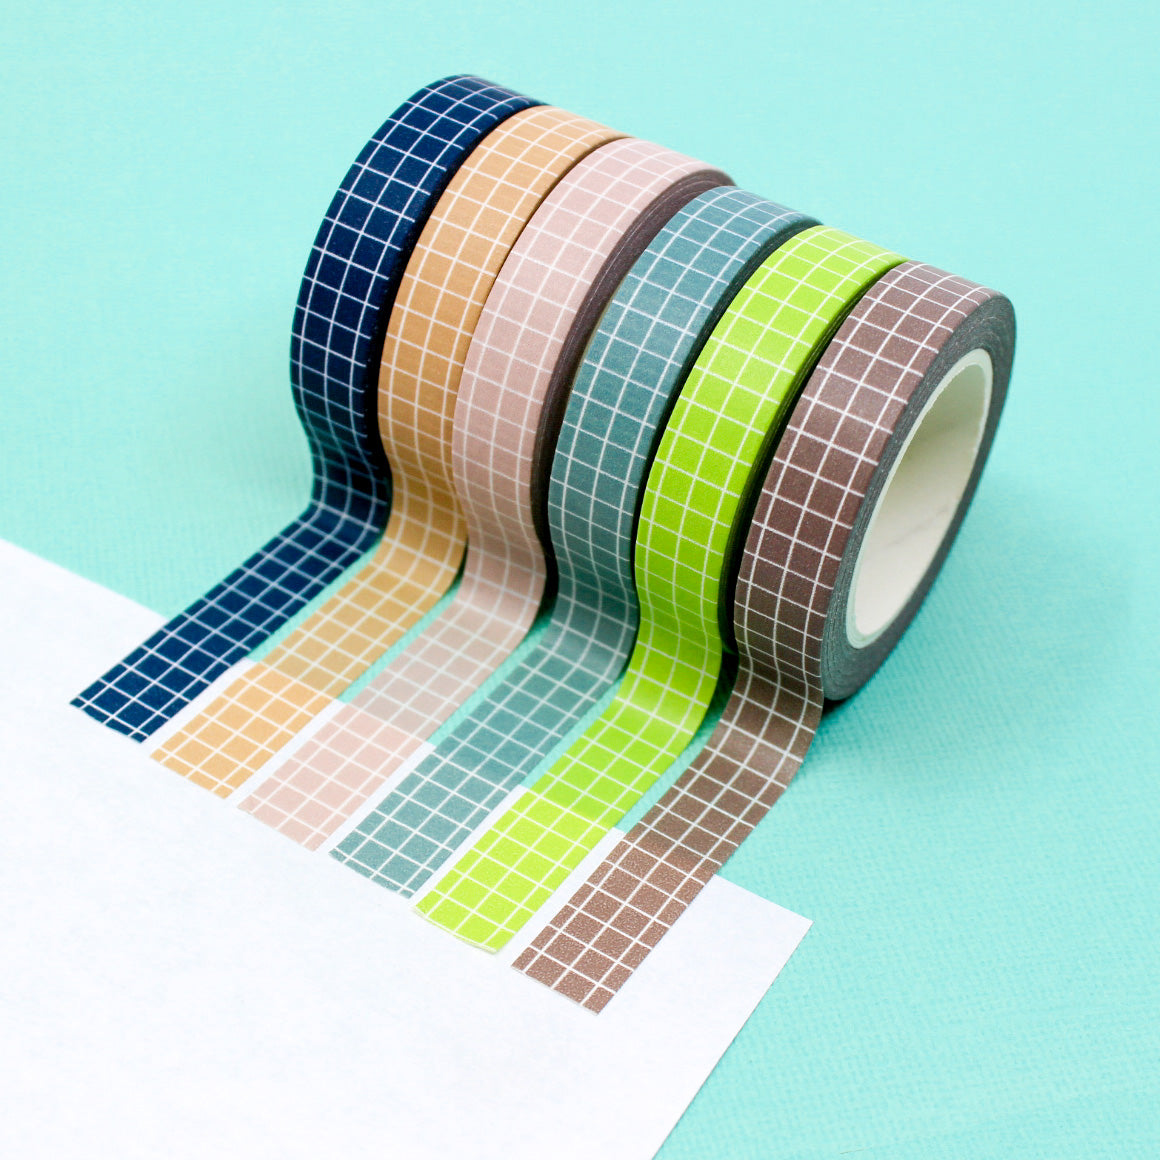 These colorful narrow grid tapes are functional and decorative, making them a must have for any planner, journal or calendar. These tapes come in Navy  Blue, Blue, Pink, Green, Brown, and peachy Tan and are sold at BBB Supplies Craft Shop.